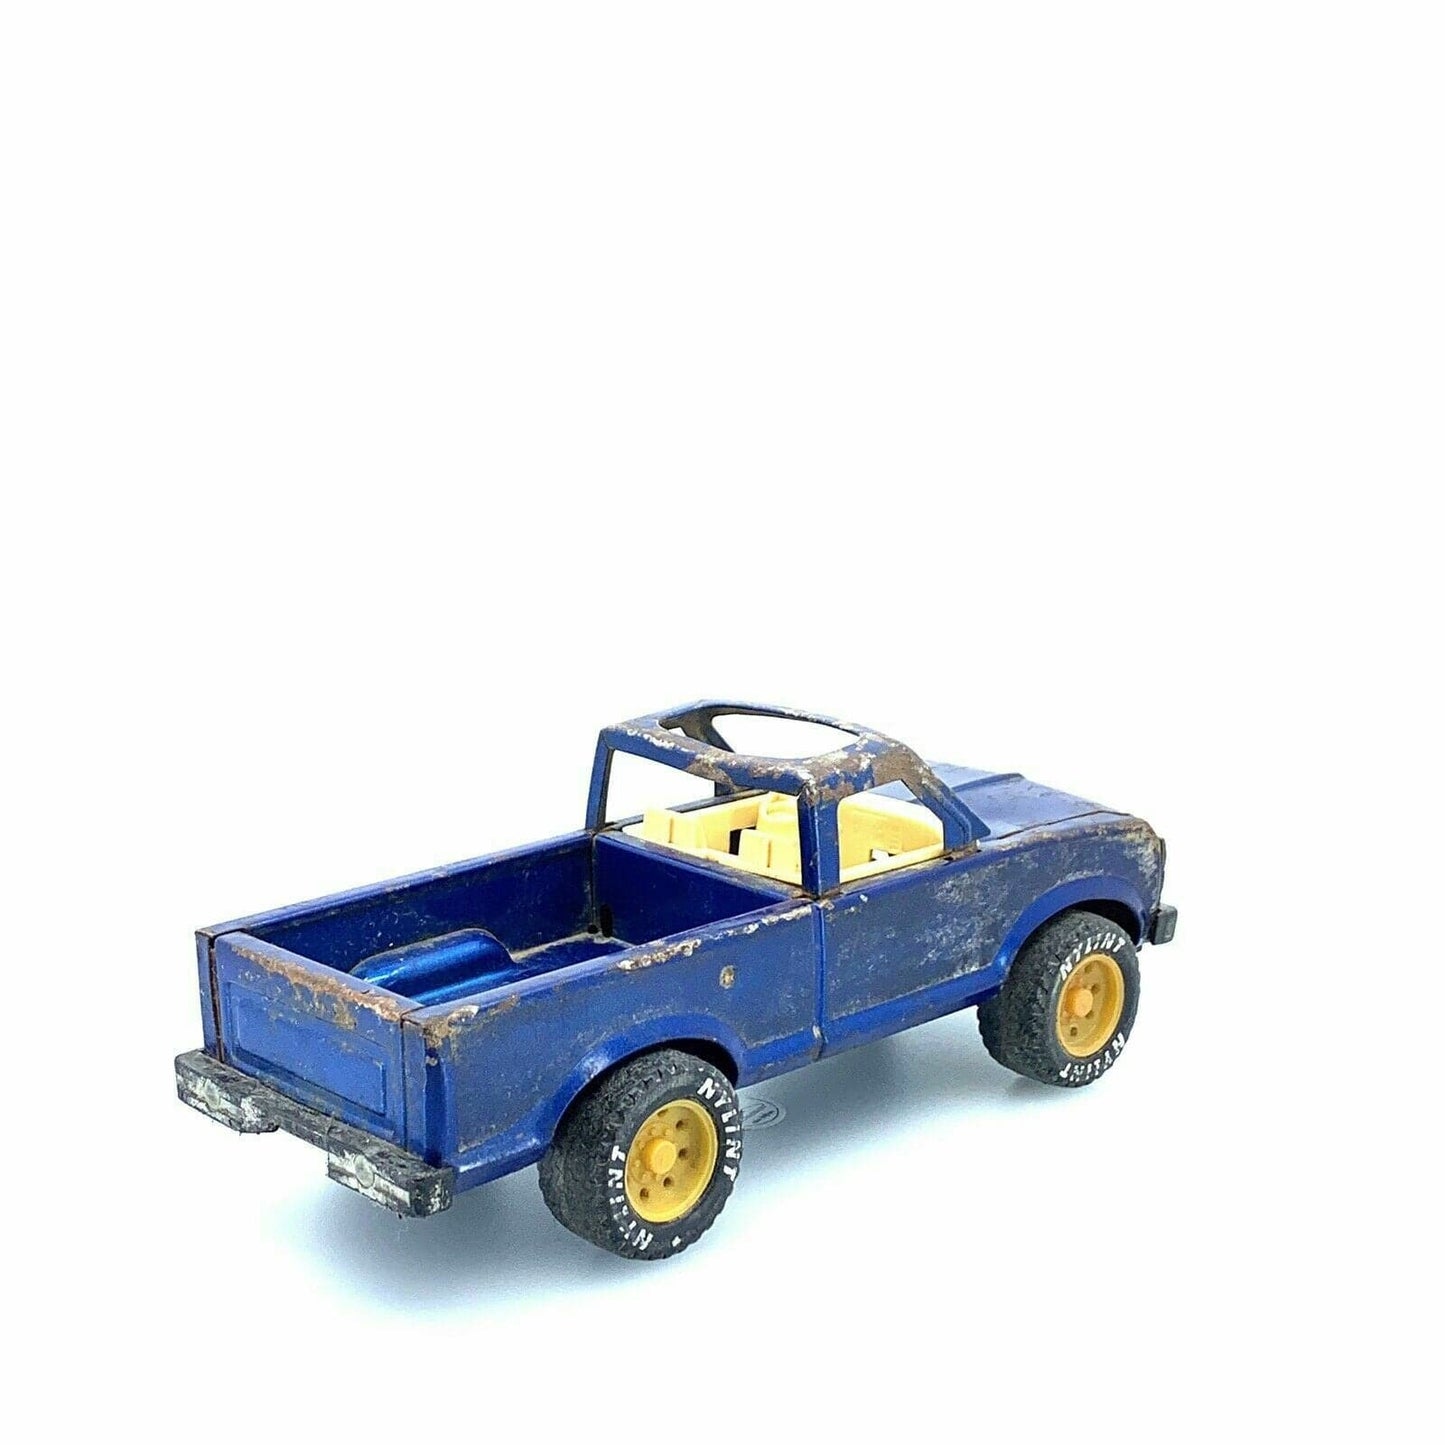 Vintage Nylint 1968 Race Team Truck Chassis, Blue - 11”